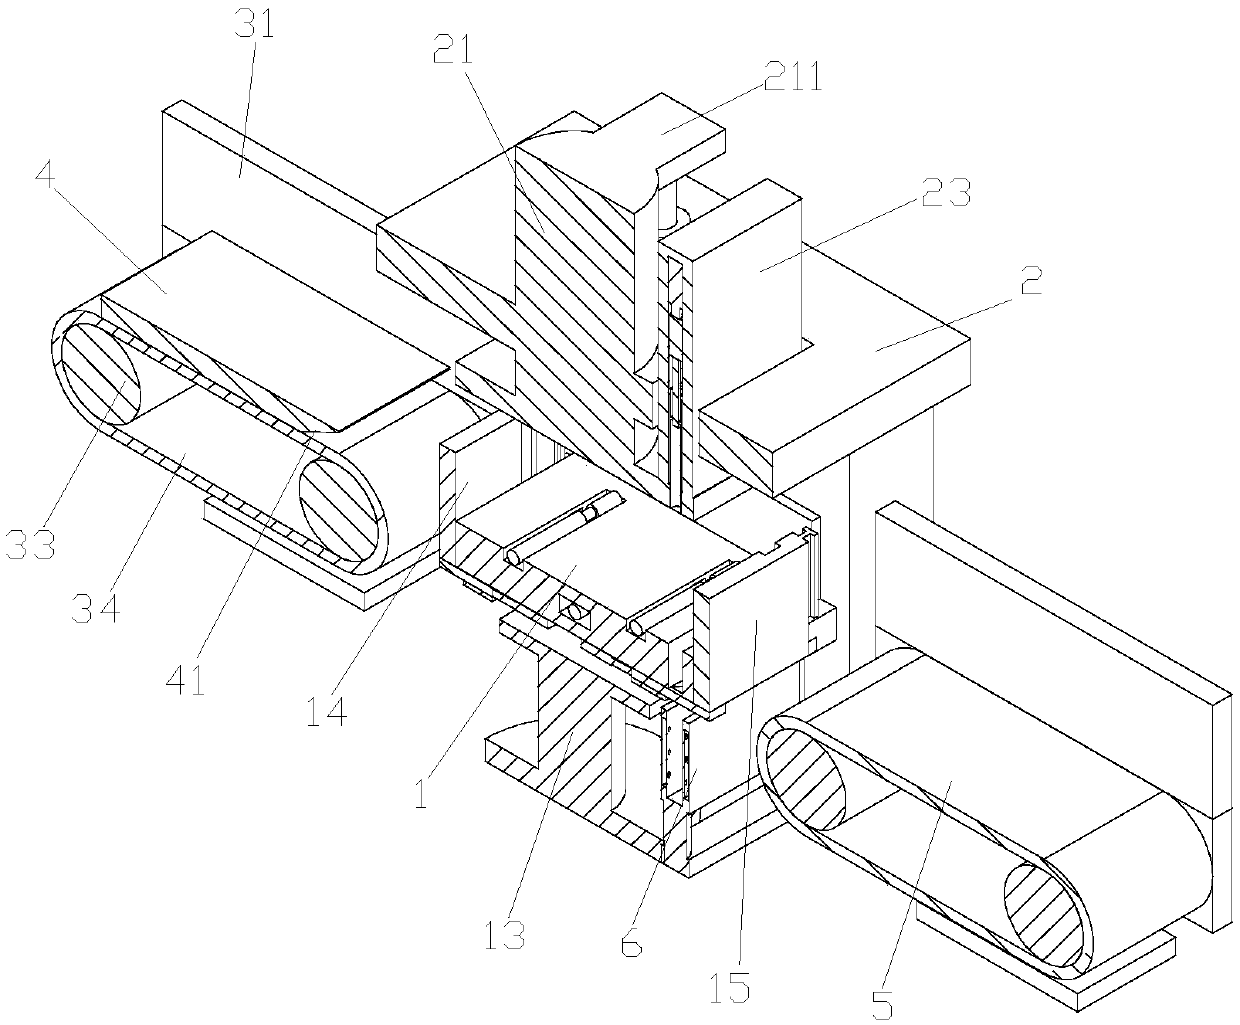 Paper processing and punching device